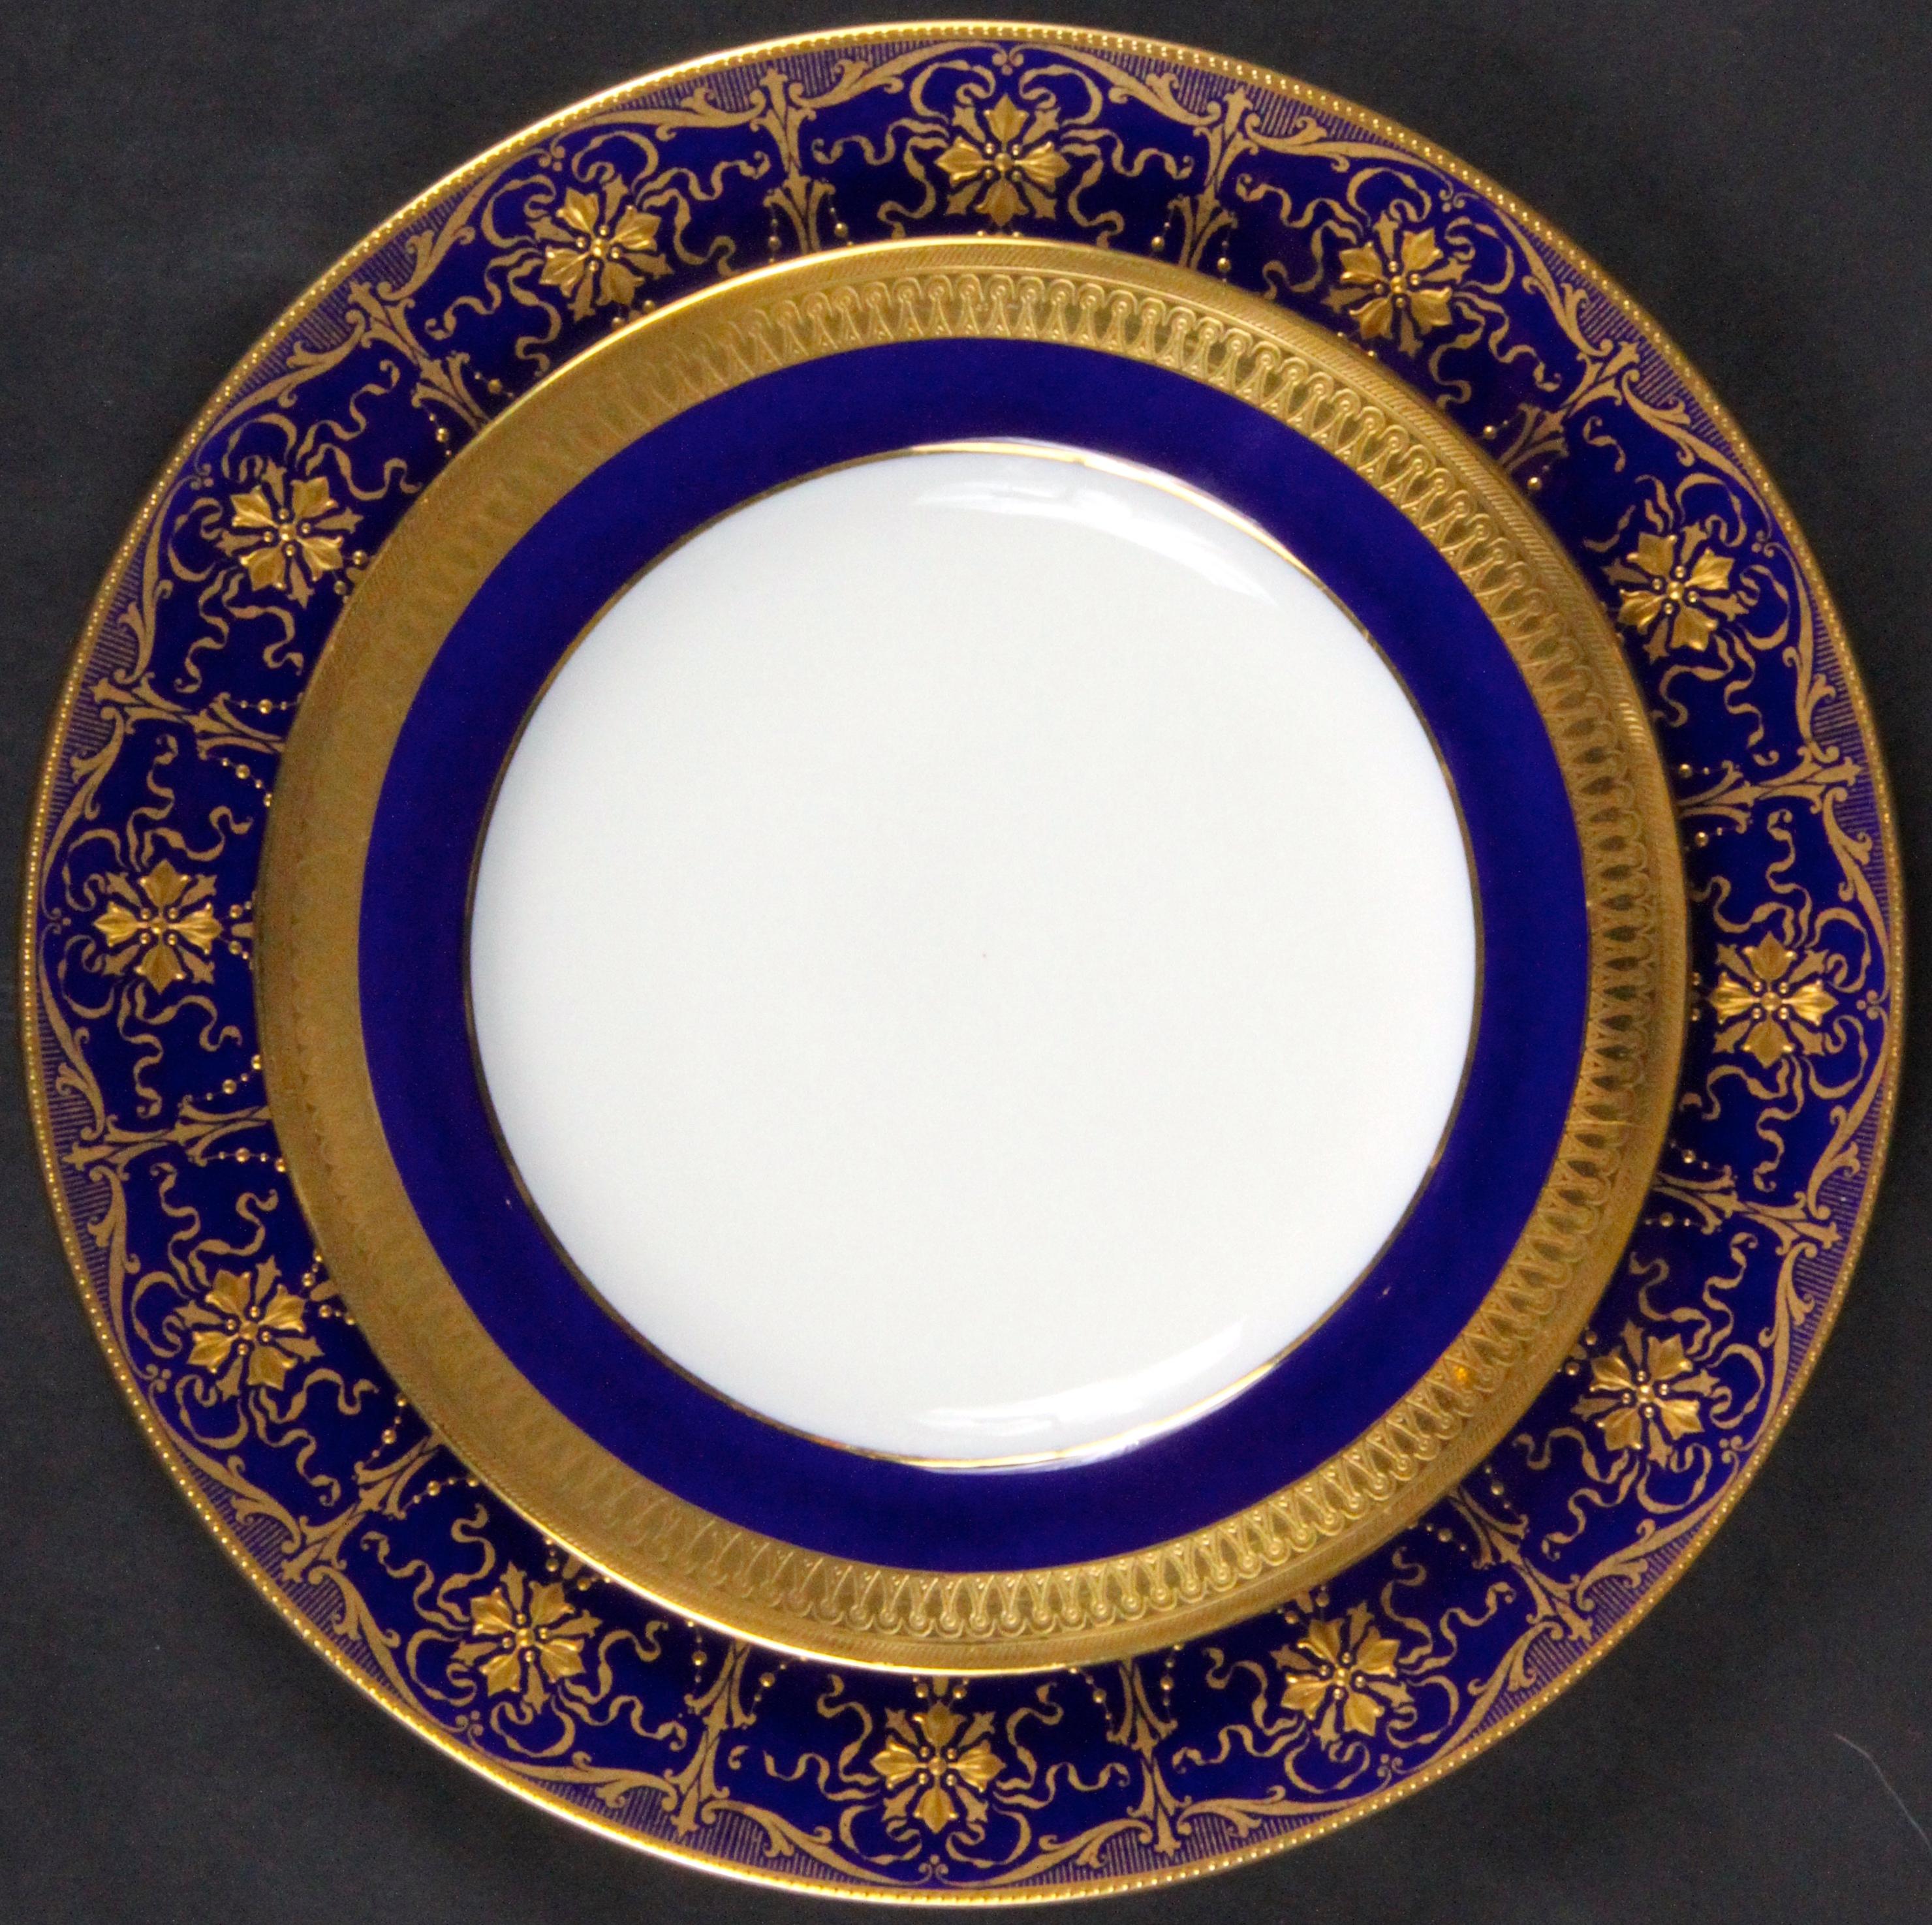 These 12 Minton, stoke-on-trent, England 22-karat gold encrusted service or dinner plates feature a cobalt border divided by columns of lotus flowers, between the columns lie stylized flowers enhanced with ribbons and gold beading, all rendered in